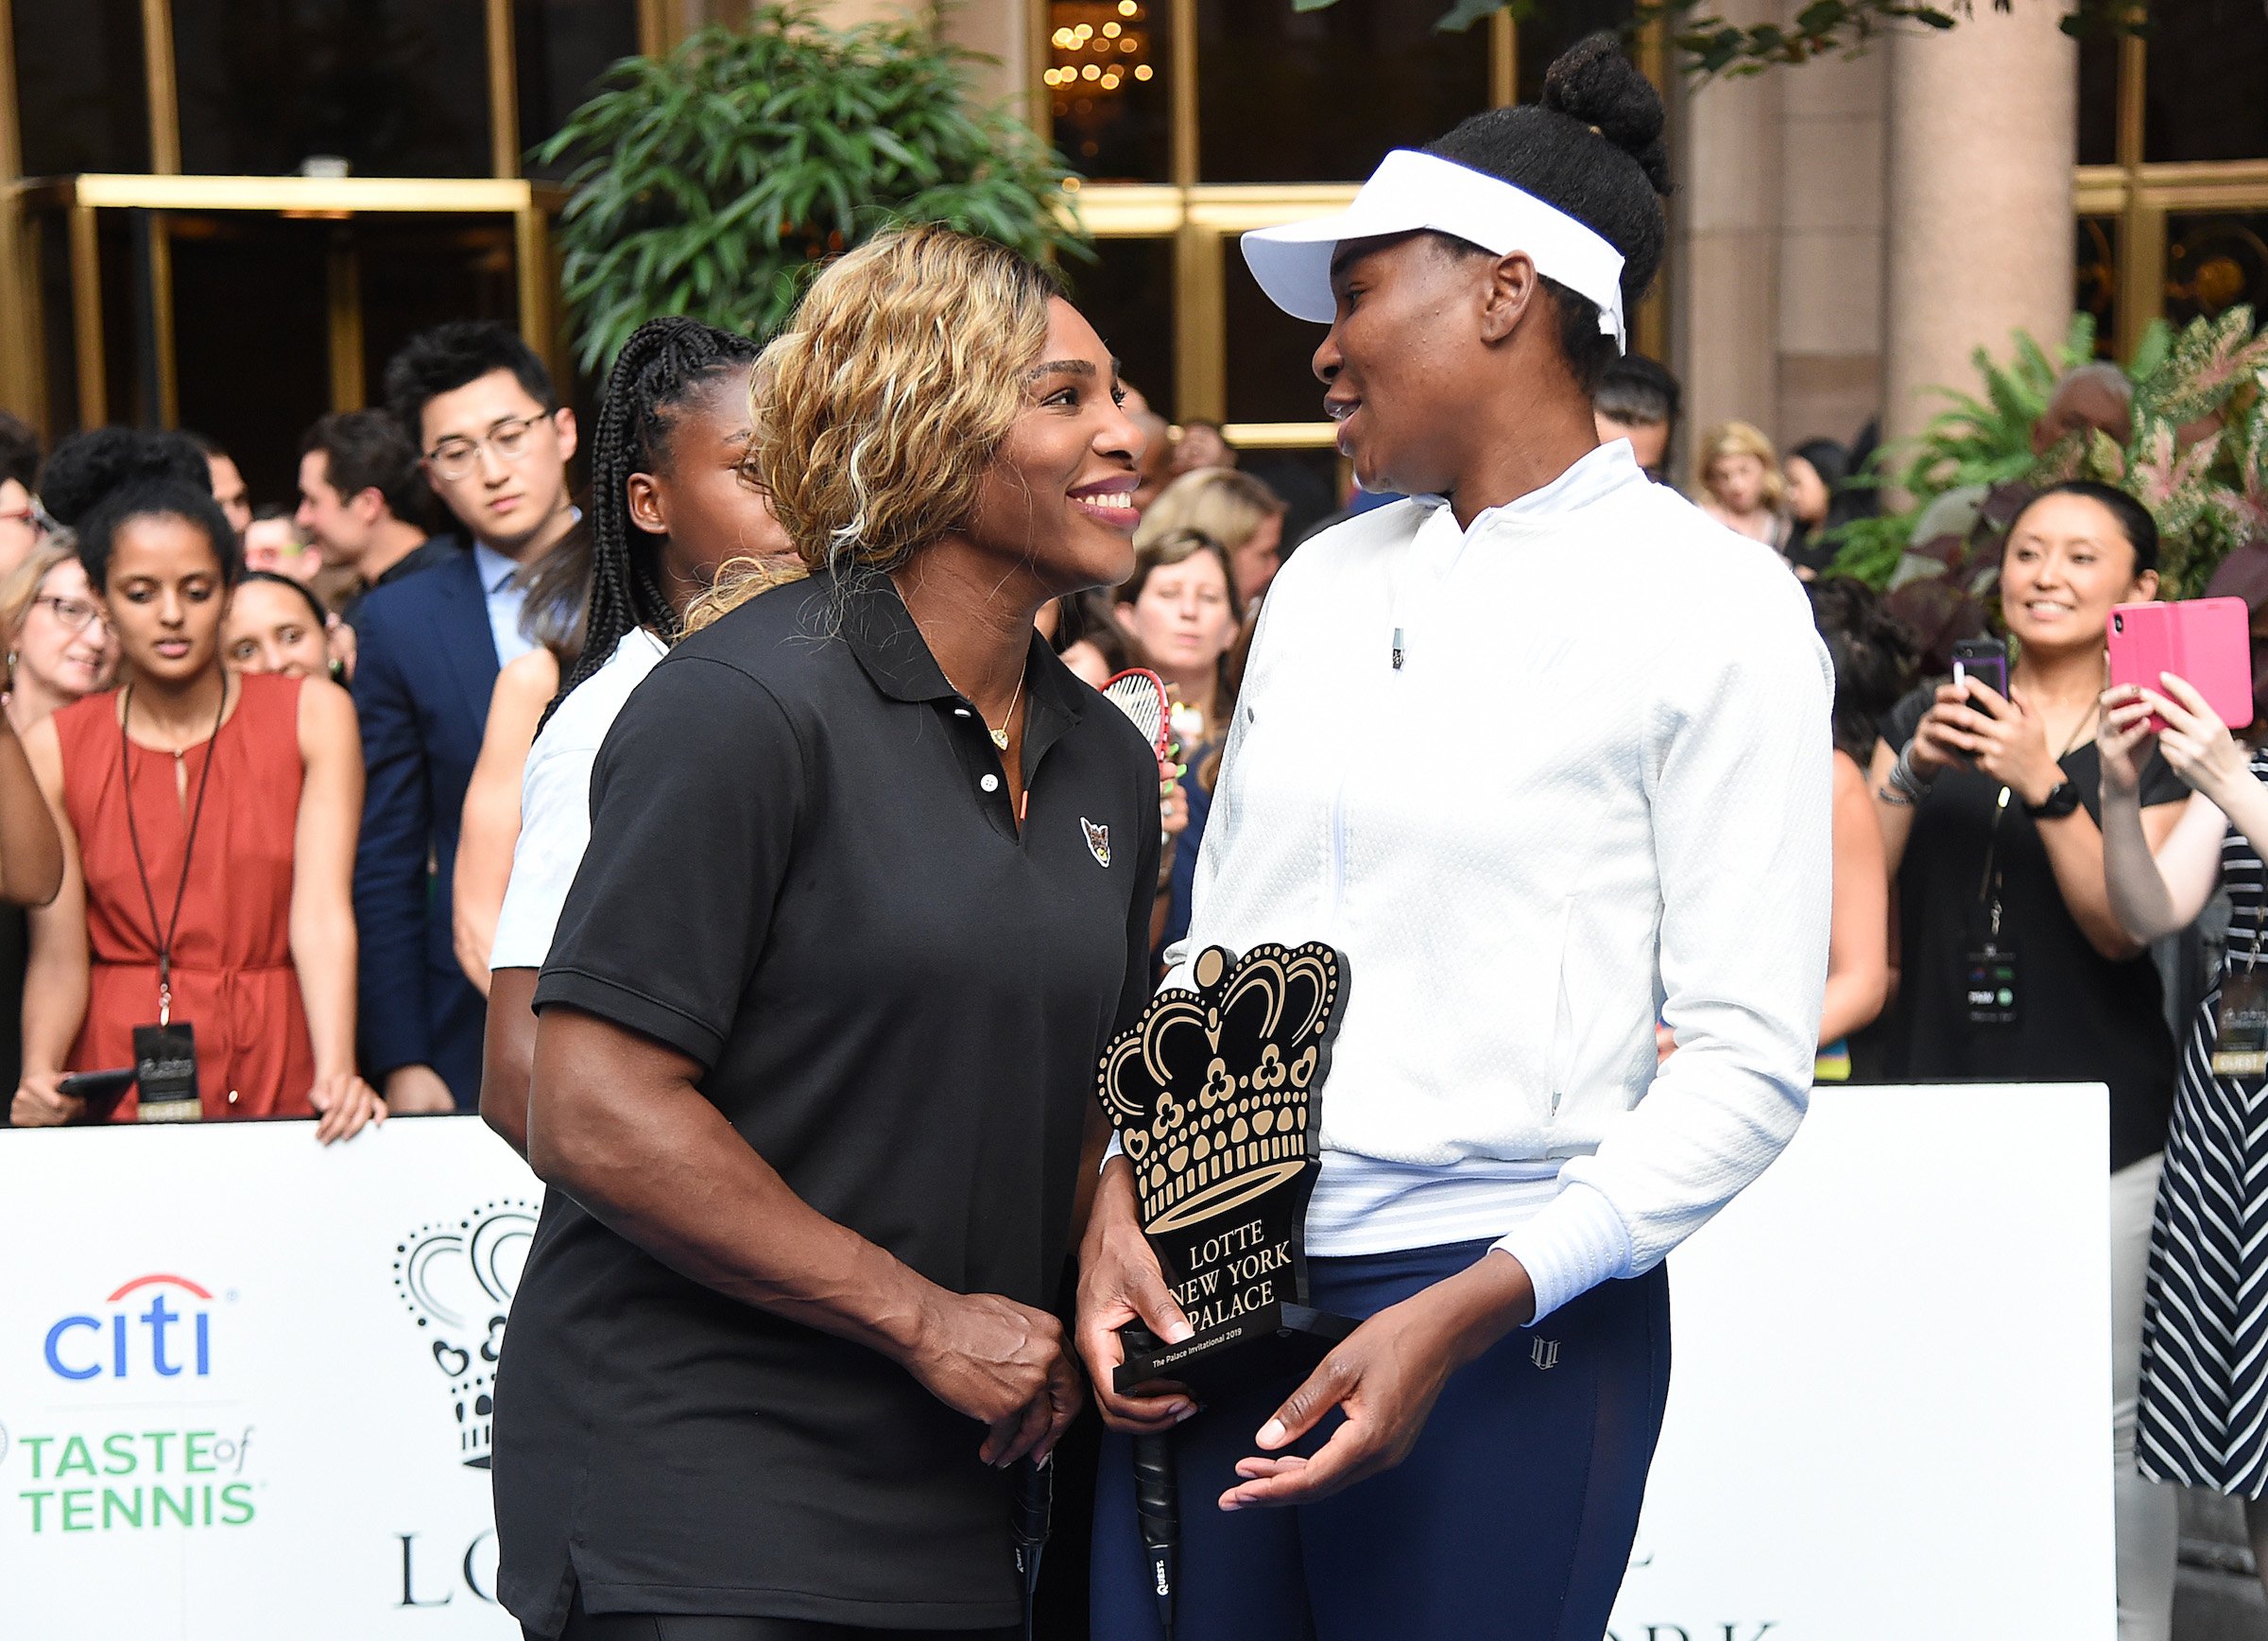 Serena Williams and Venus Williams attend the 2019 Palace Invitational. Venus Williams' height makes her stand taller over Serena Williams.